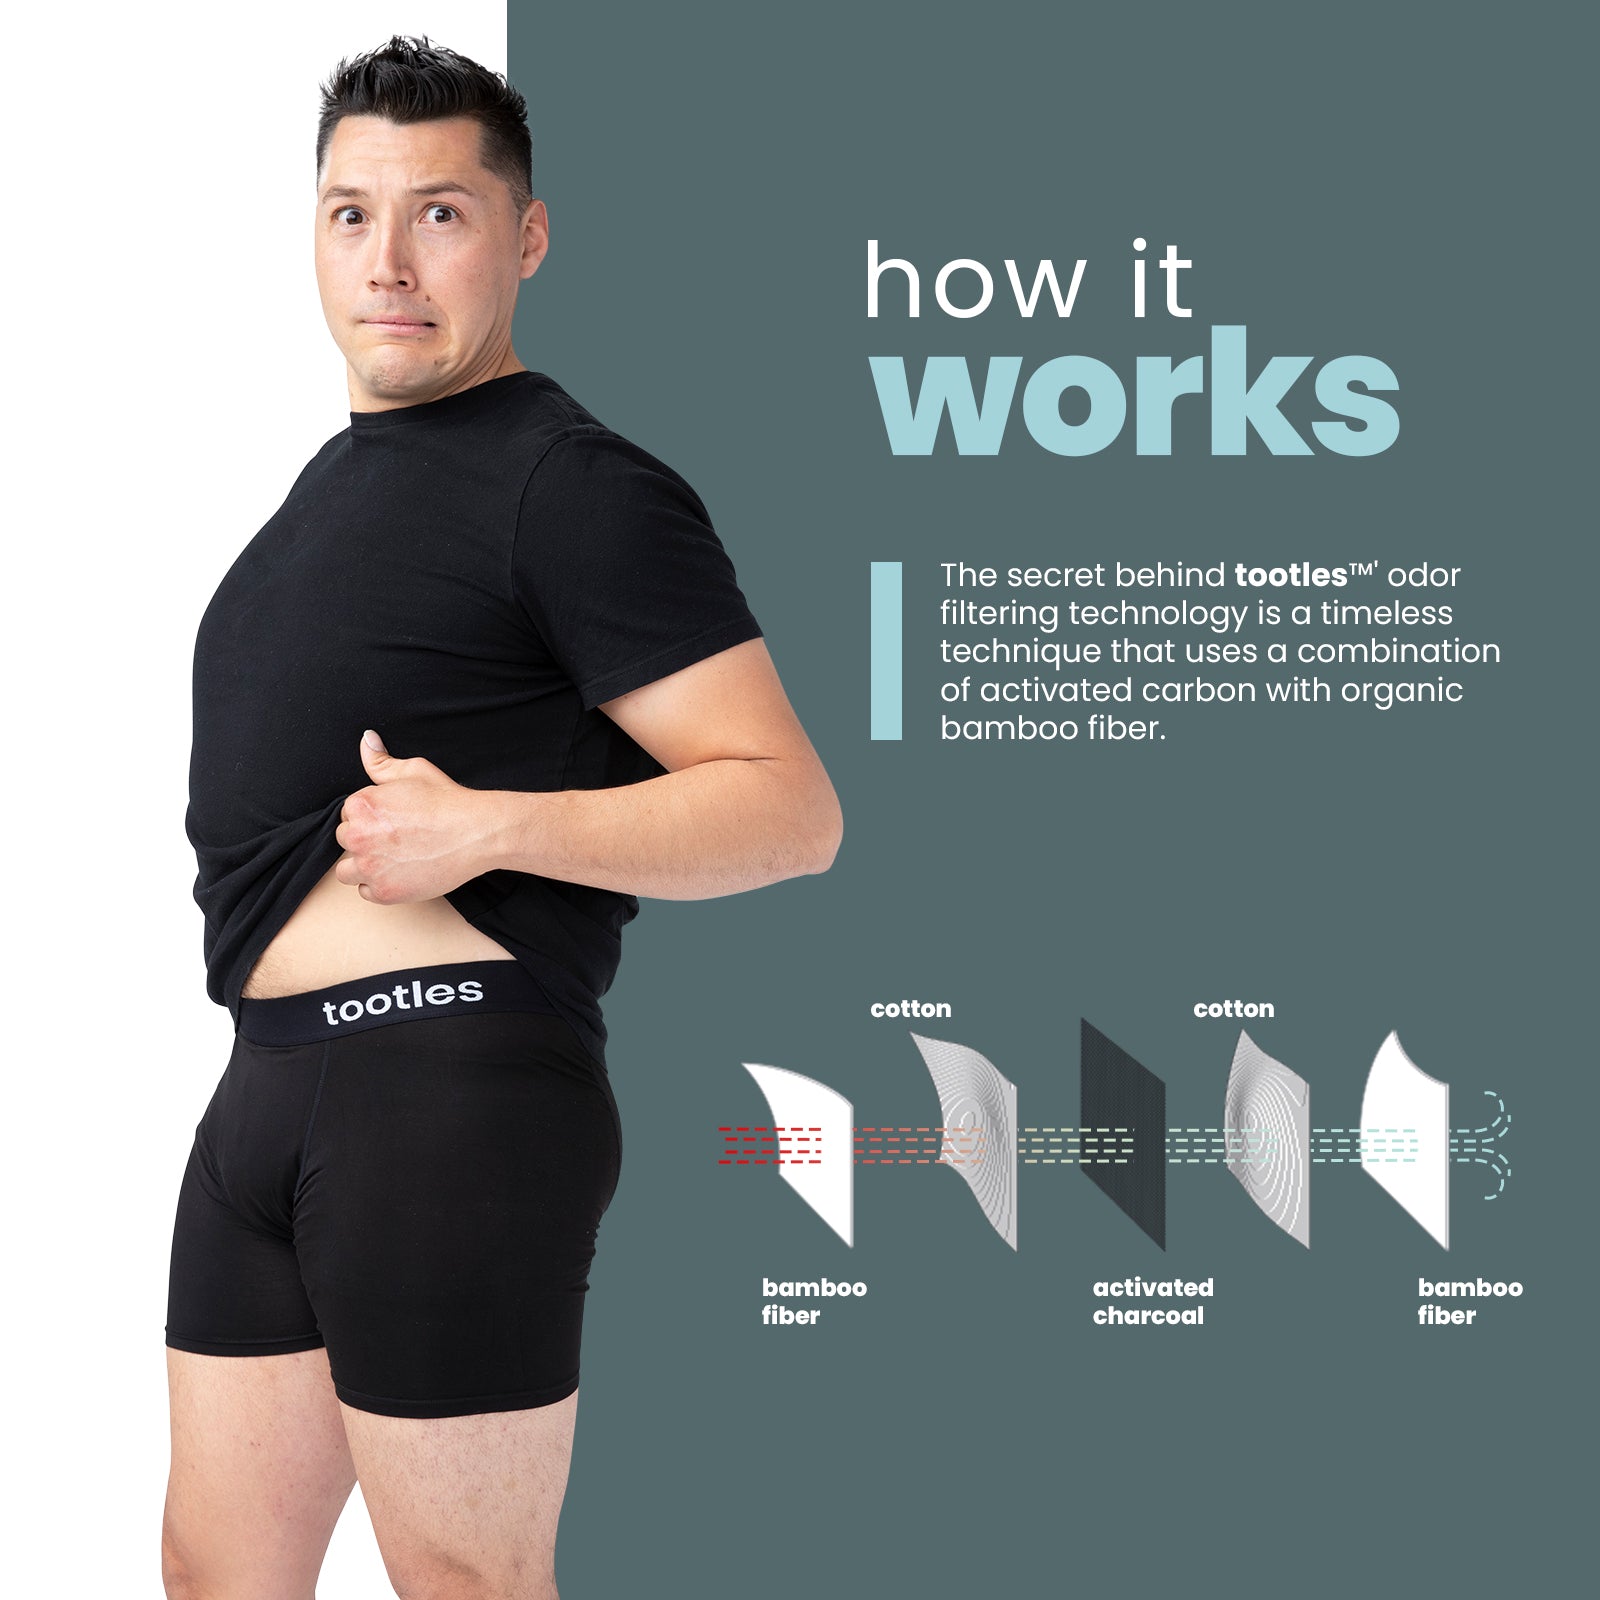 Tootles - Wait fart filtering underwear? Is that such a thing